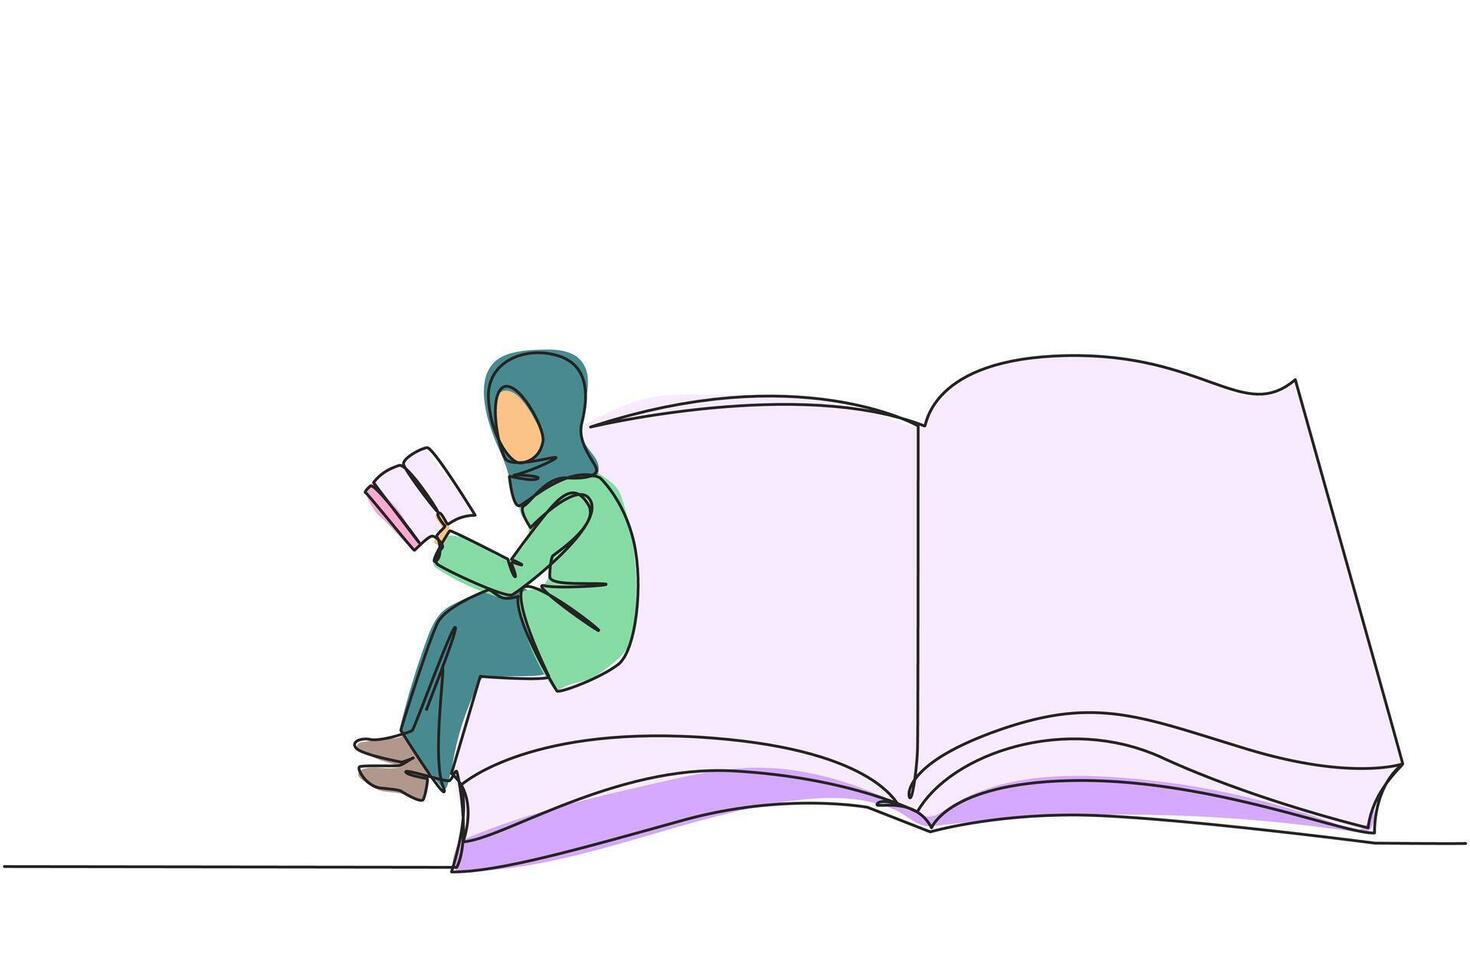 Single one line drawing Arabian woman sitting on the edge of a large open book. Study before exam time arrives. Read textbooks with focus. Reading is fun. Continuous line design graphic illustration vector